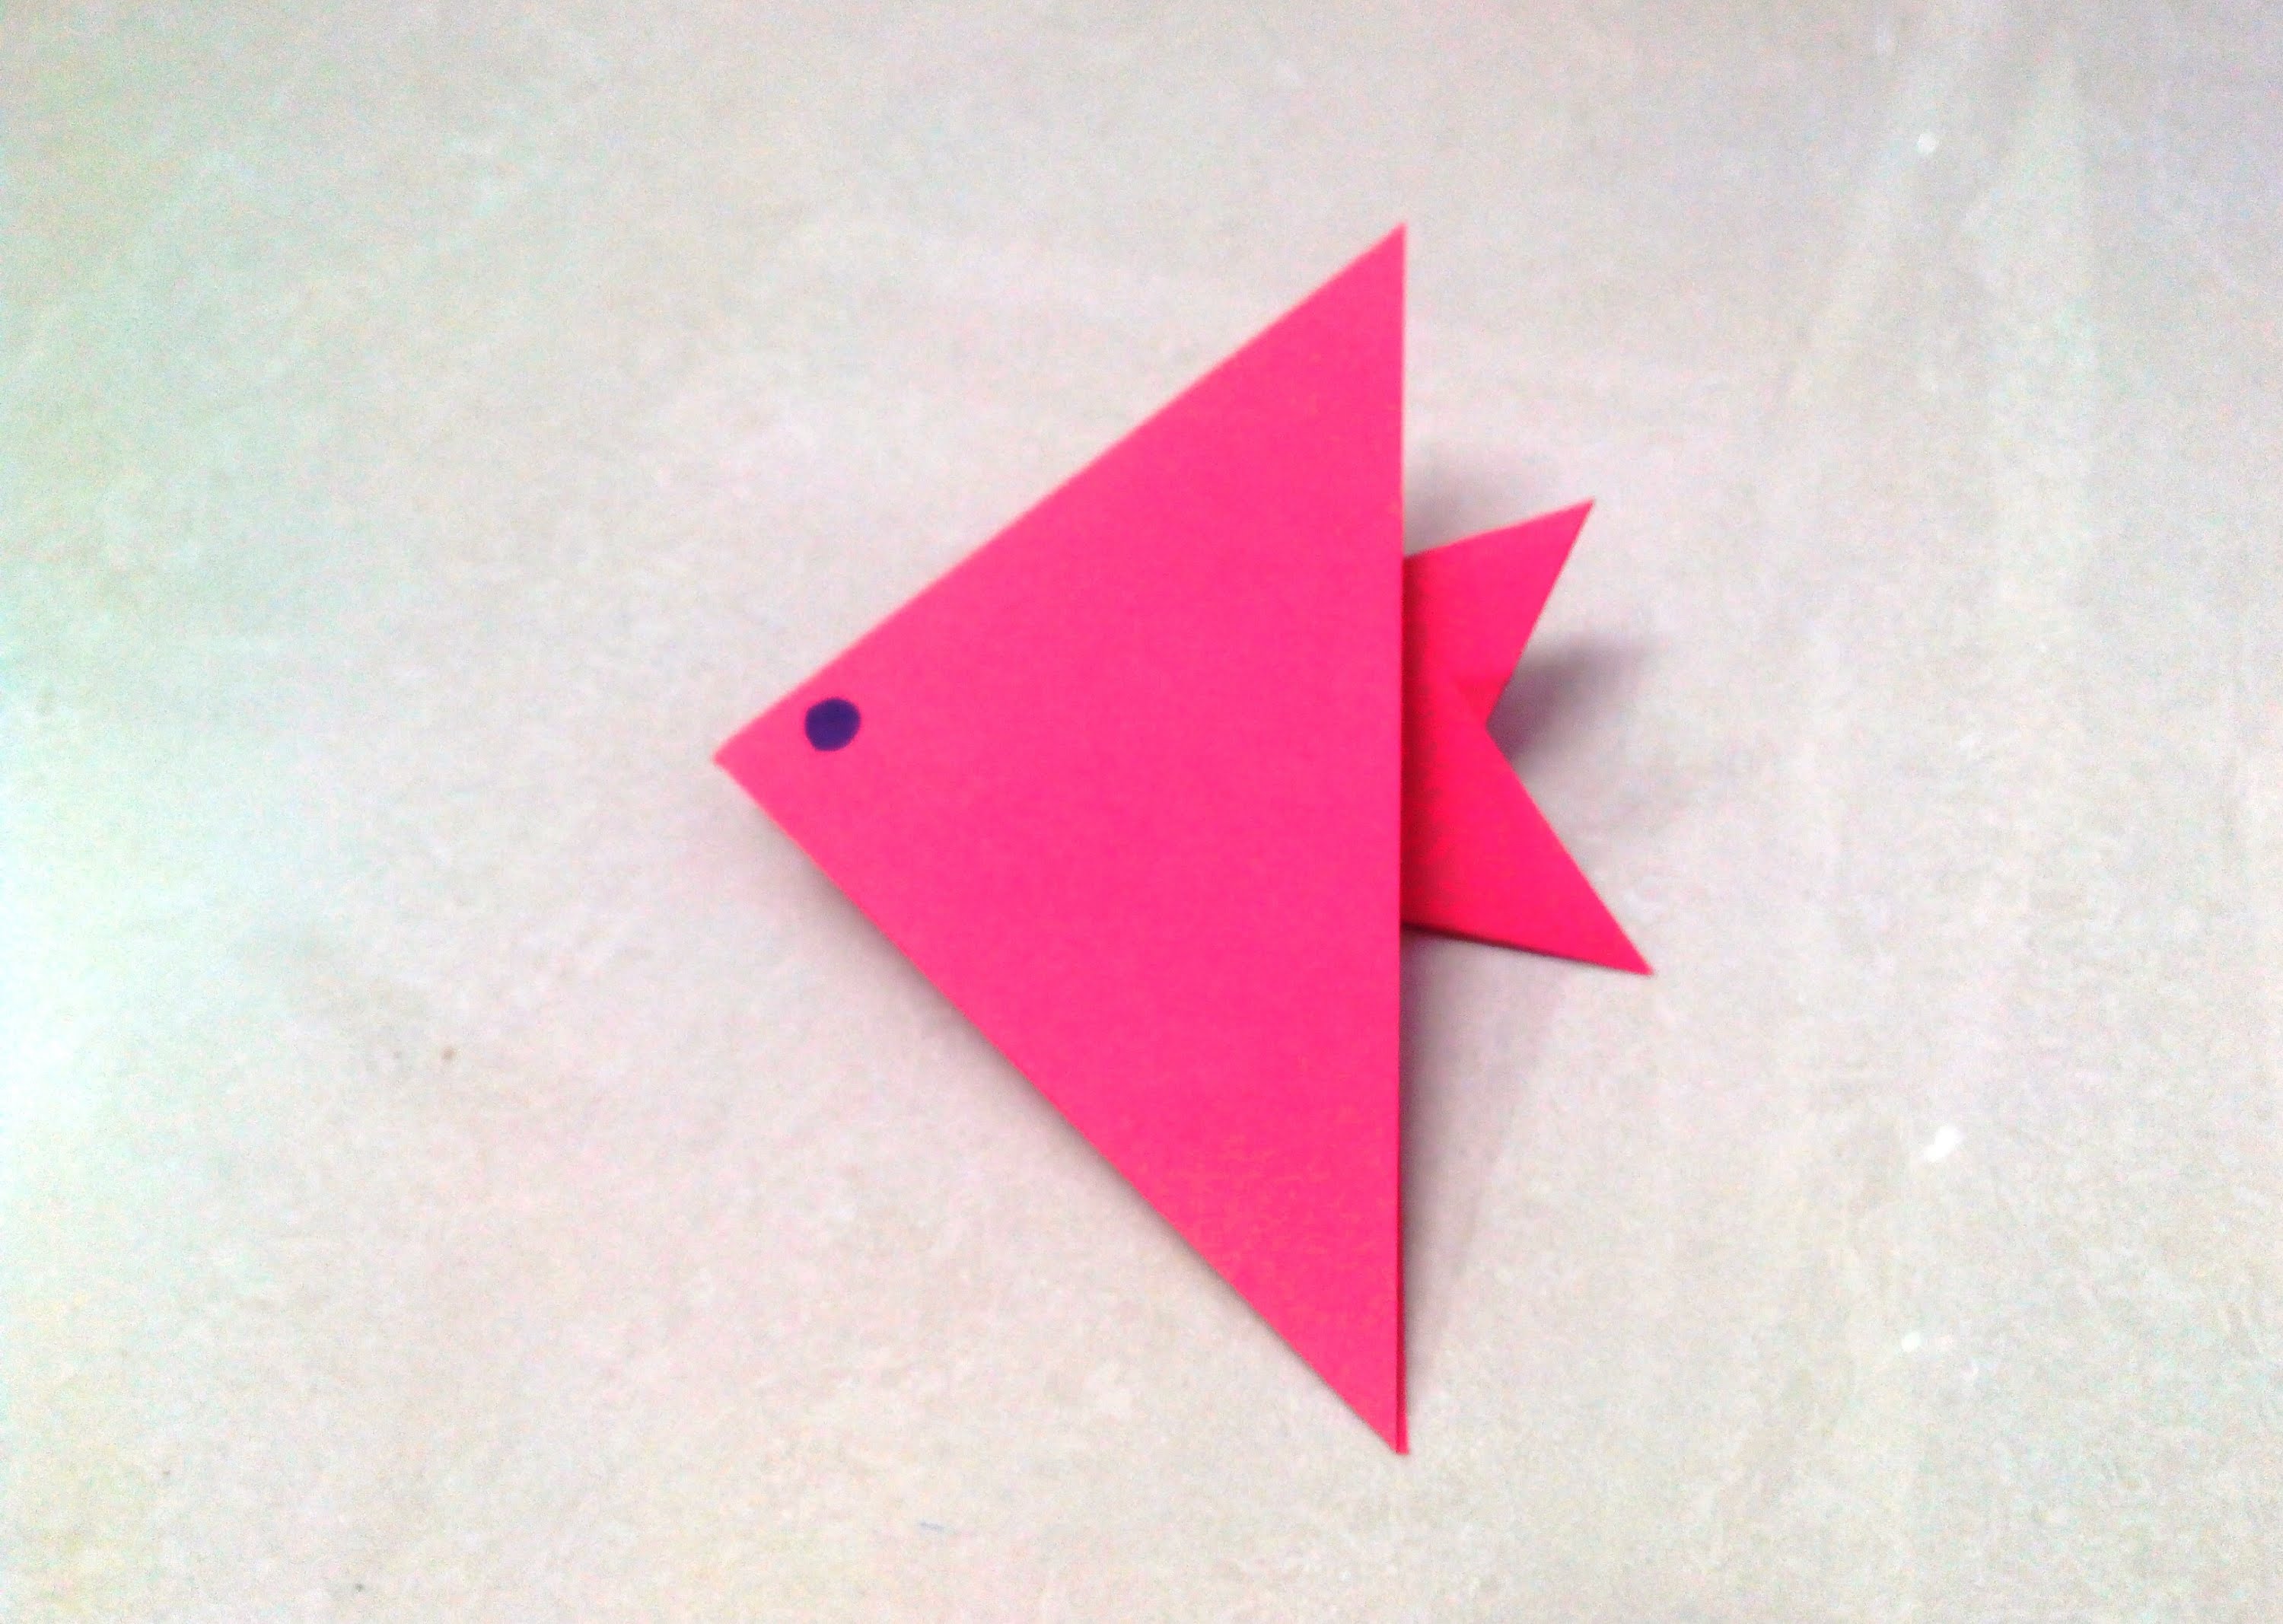 How to make an origami paper fish - 1 | Origami / Paper Folding ...